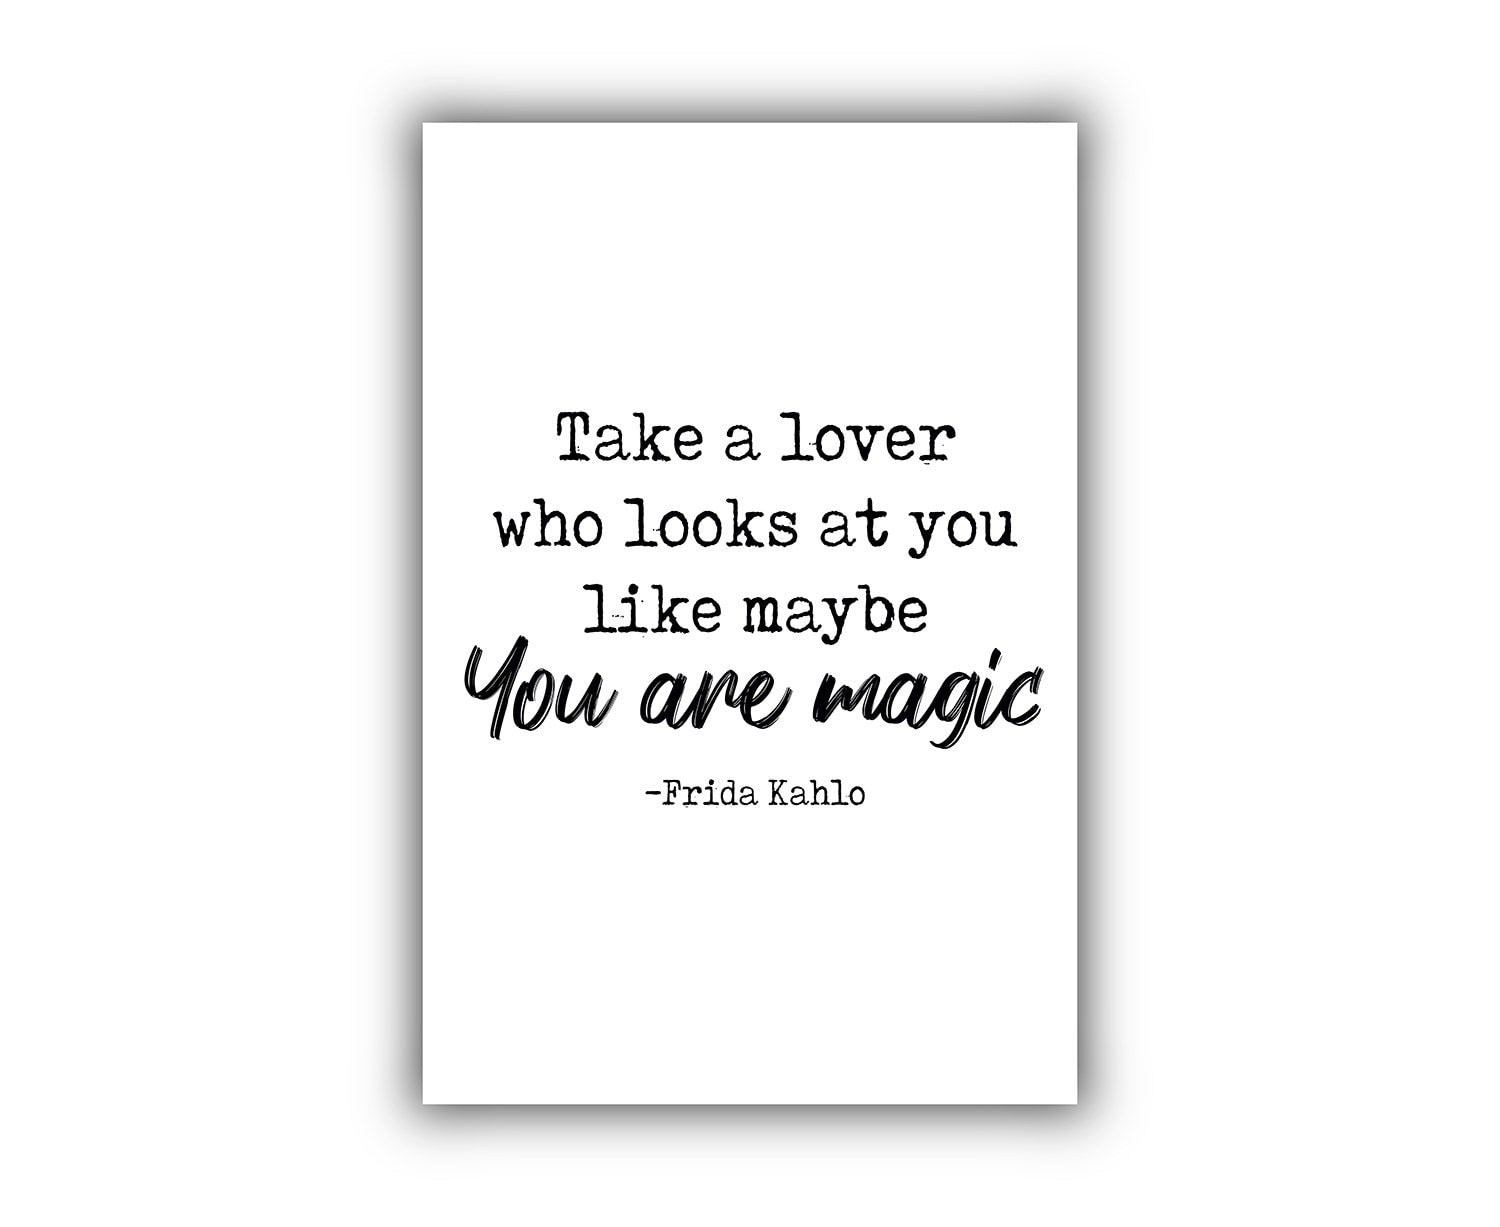 Take a Lover Who.. Frida kahlo quotes, Poster prints, Inspirational quote prints, Motivational quote posters, Home wall art, Room wall arts